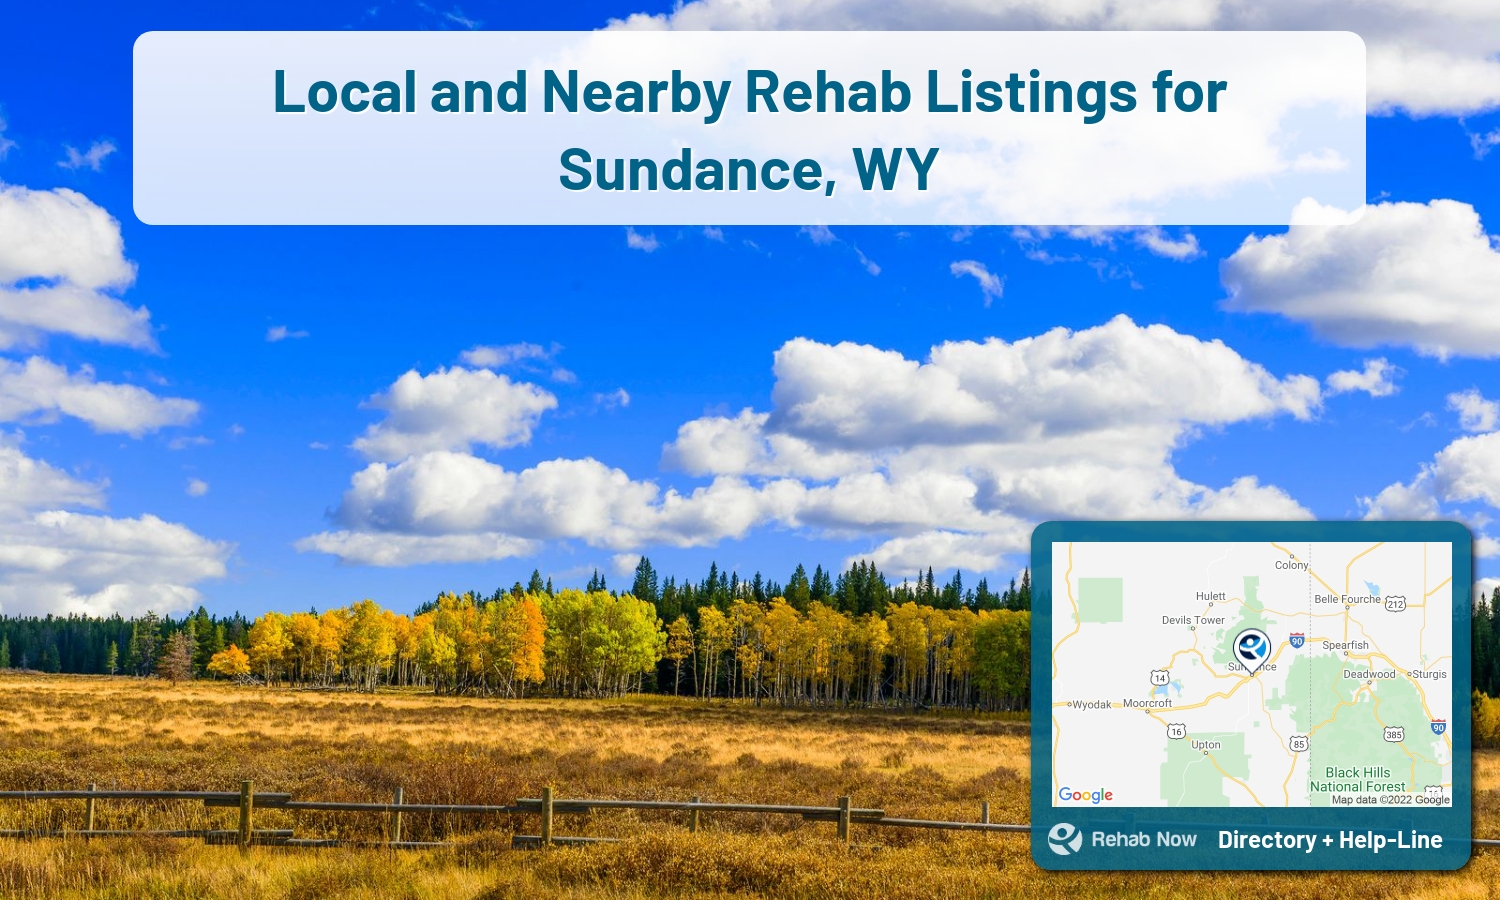 List of alcohol and drug treatment centers near you in Sundance, Wyoming. Research certifications, programs, methods, pricing, and more.